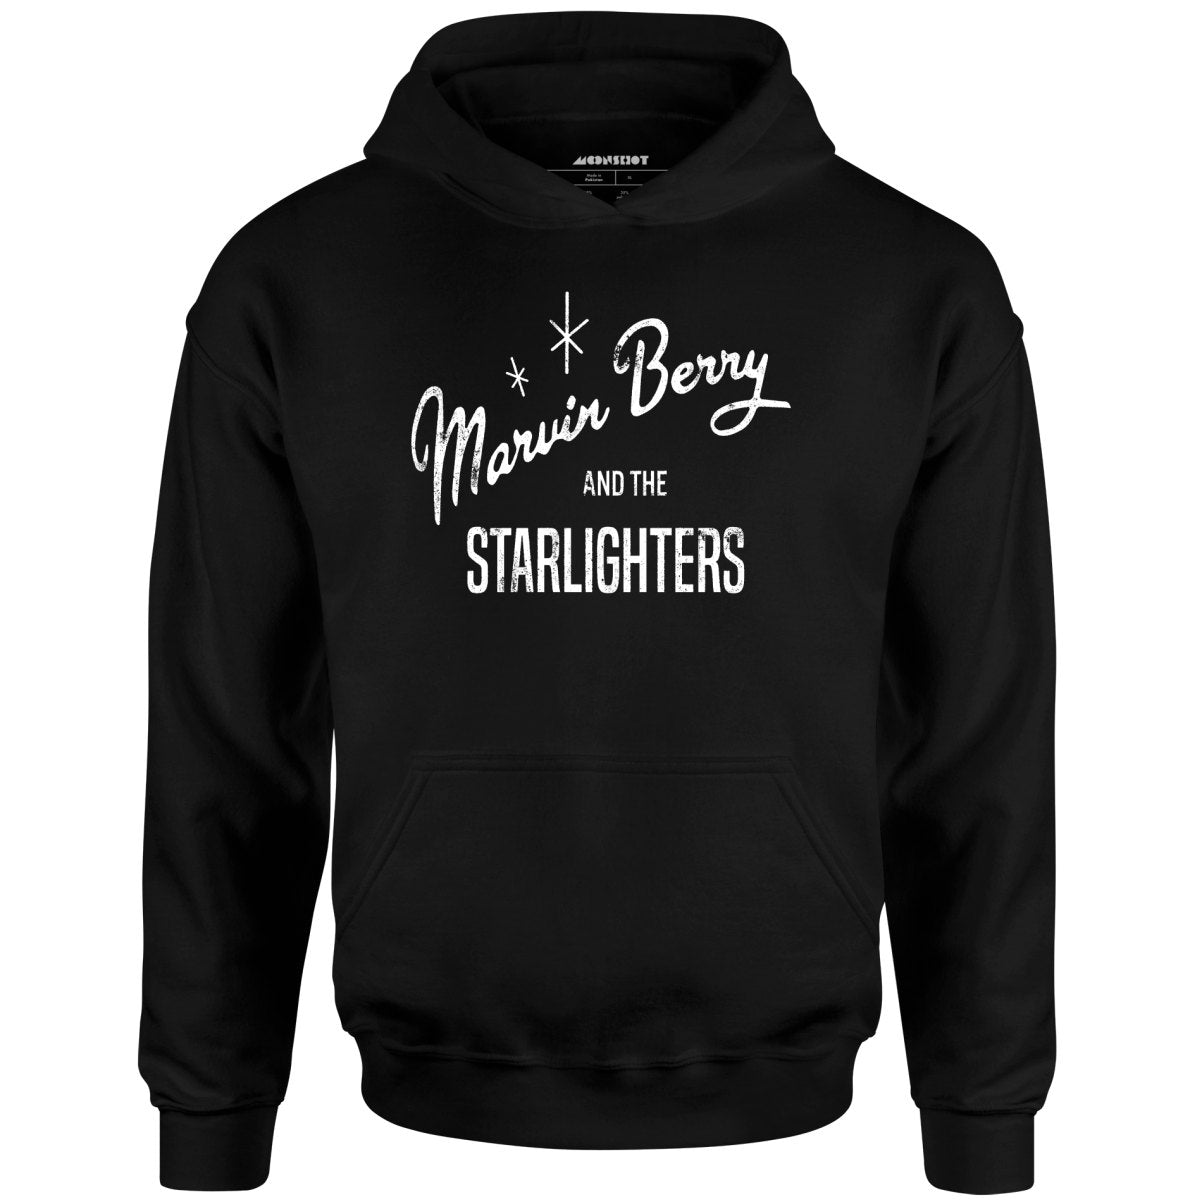 Marvin Berry and The Starlighters - Unisex Hoodie